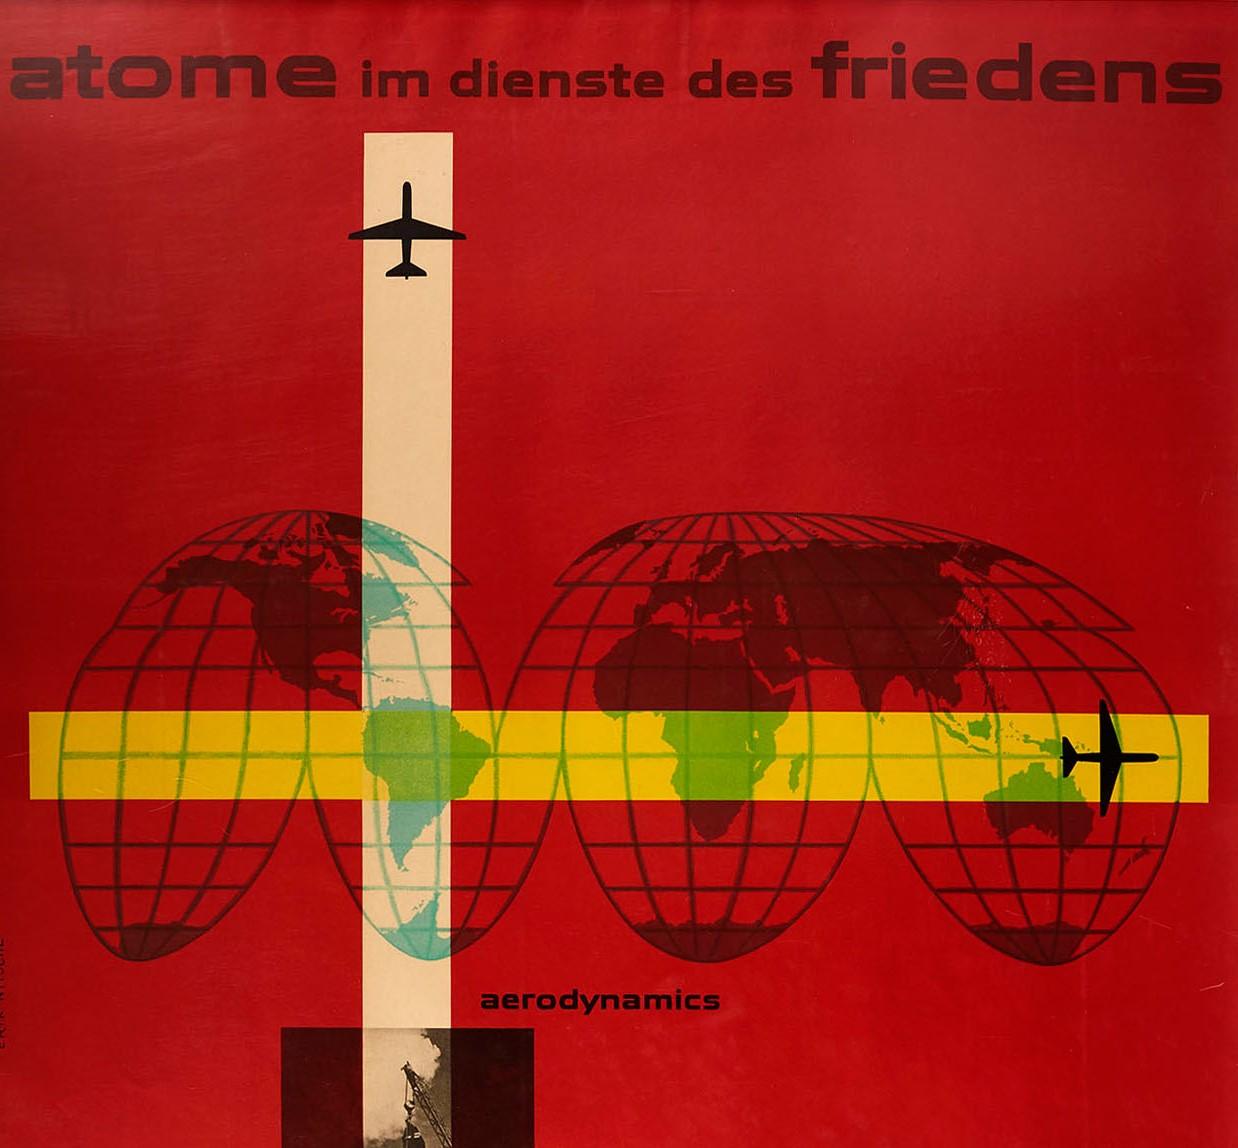 Original vintage General Dynamics poster by the illustrator, typographer and graphic designer Erik Nitsche (1908-1998) promoting Aerodynamics. Great illustration featuring two planes flying over a globe map diagram of the earth above a photo of a